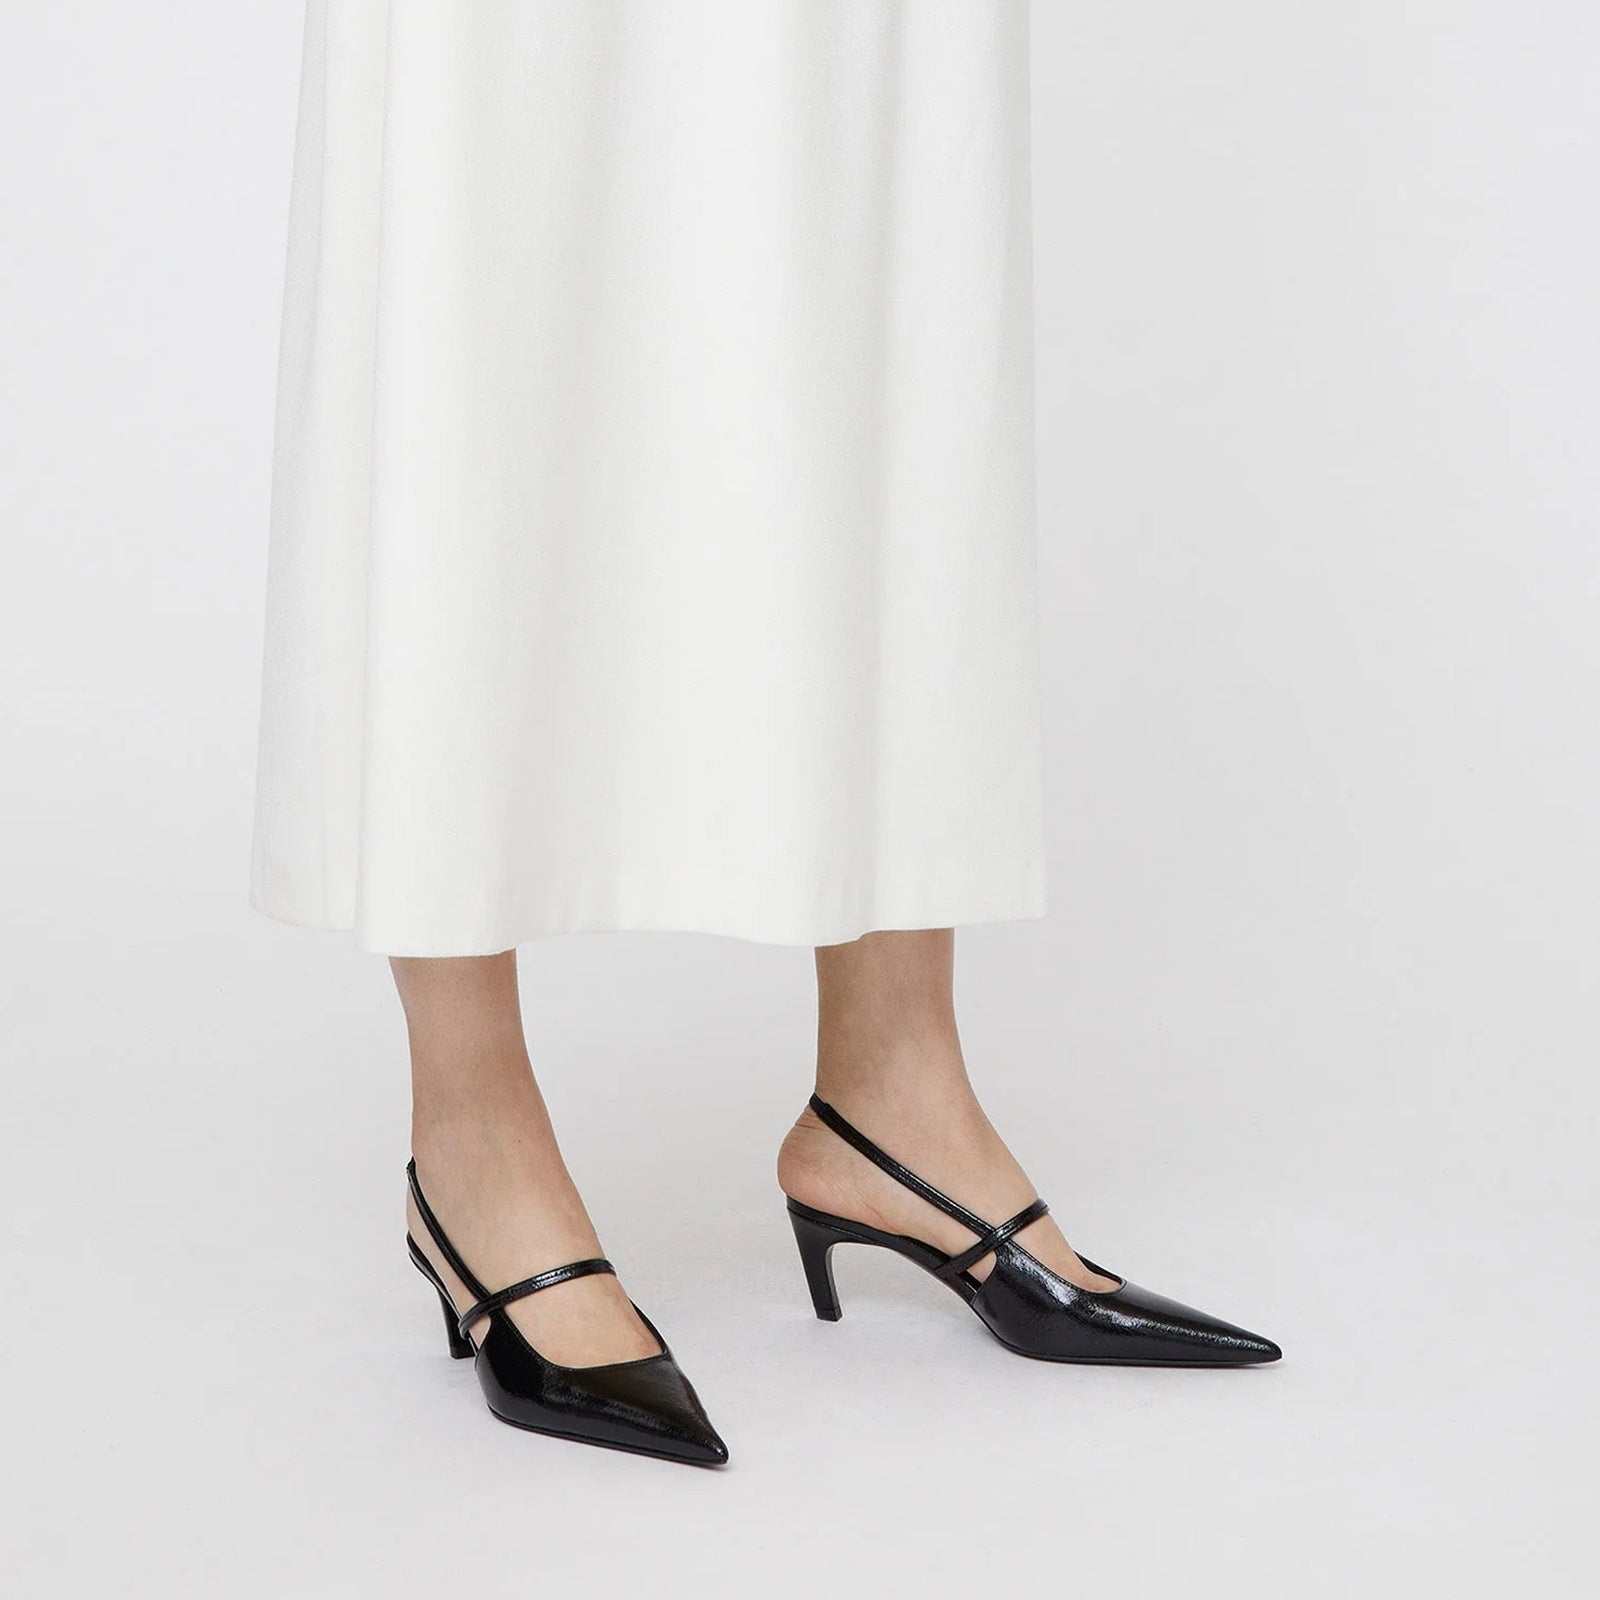 Bold Black Beauty: Sleek Pointed Toe Pumps in Black with straps and slingback,